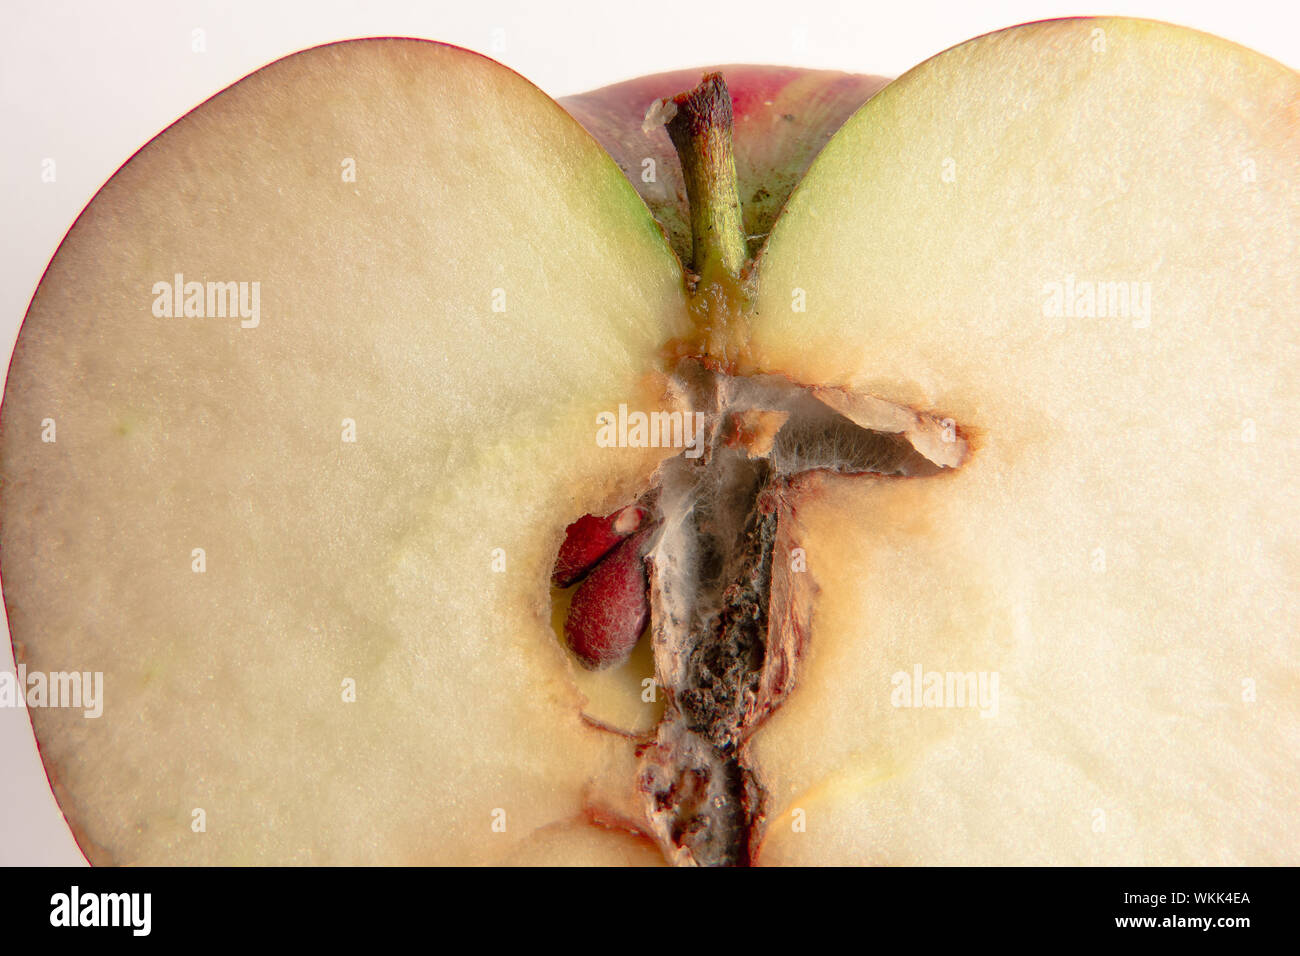 Sliced wormy apple macro image on white background. Close up of fresh ripe fruit with core and kernels affected by maggot pest Stock Photo